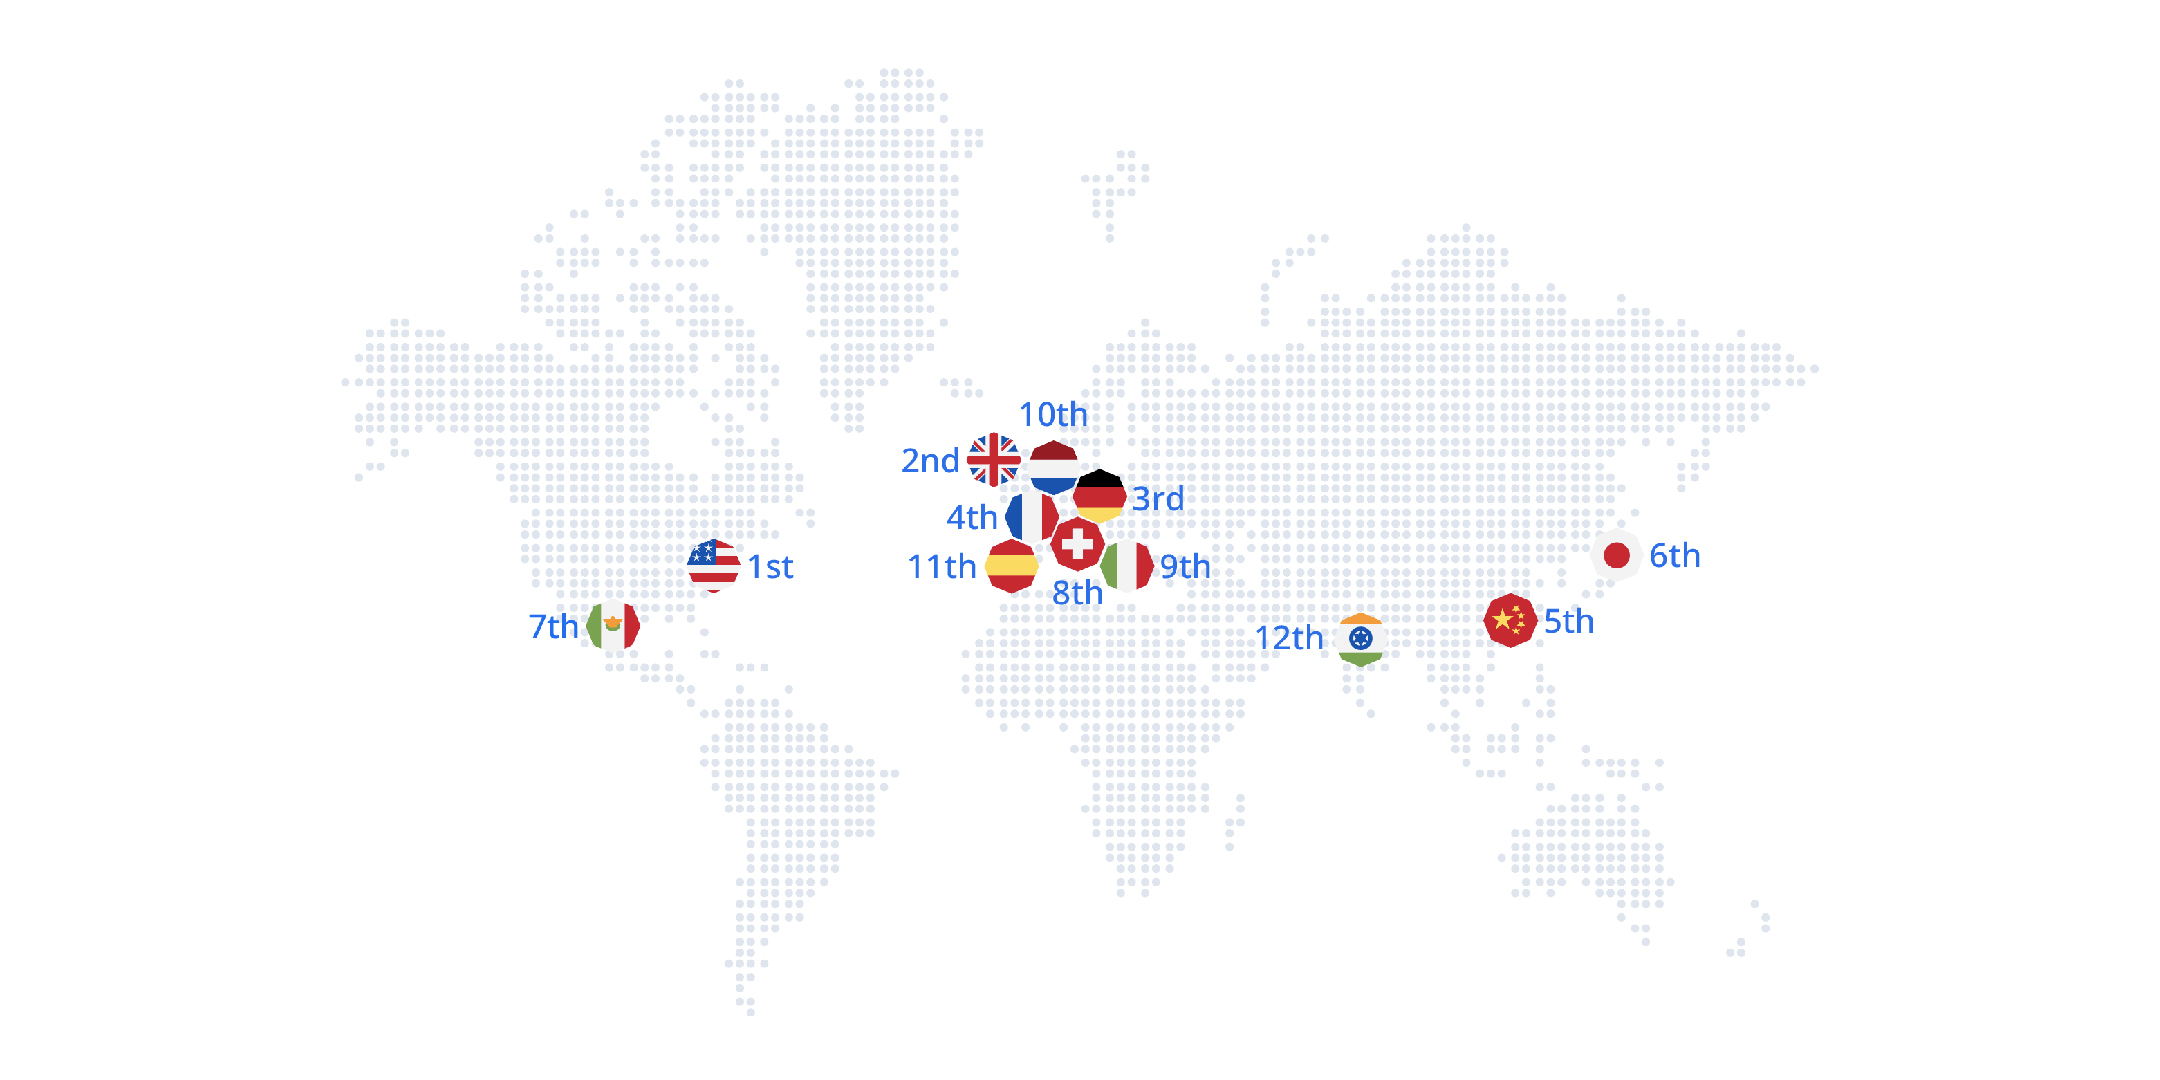 Ultimaker 3D Printing Sentiment Index 2019 global rankings map